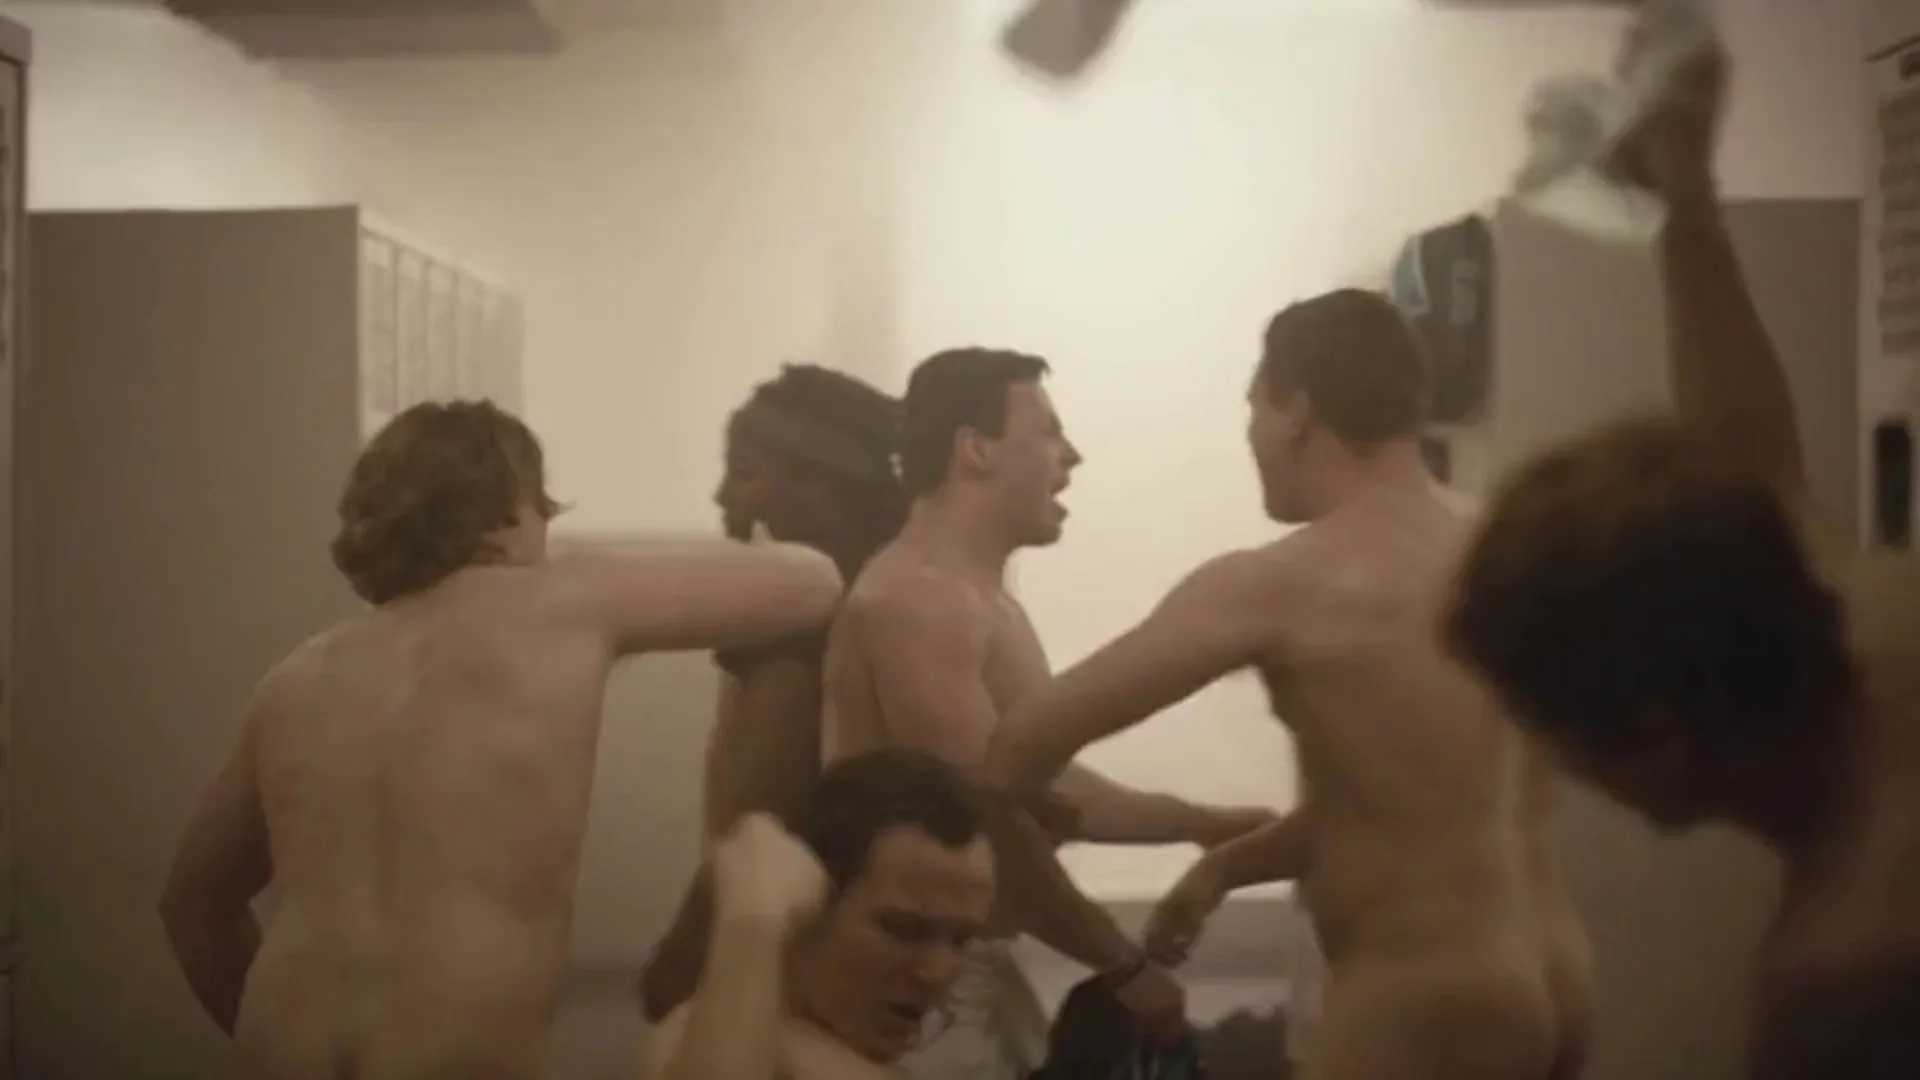 Various male nudity and sex scenes from TV show Euphoria. 